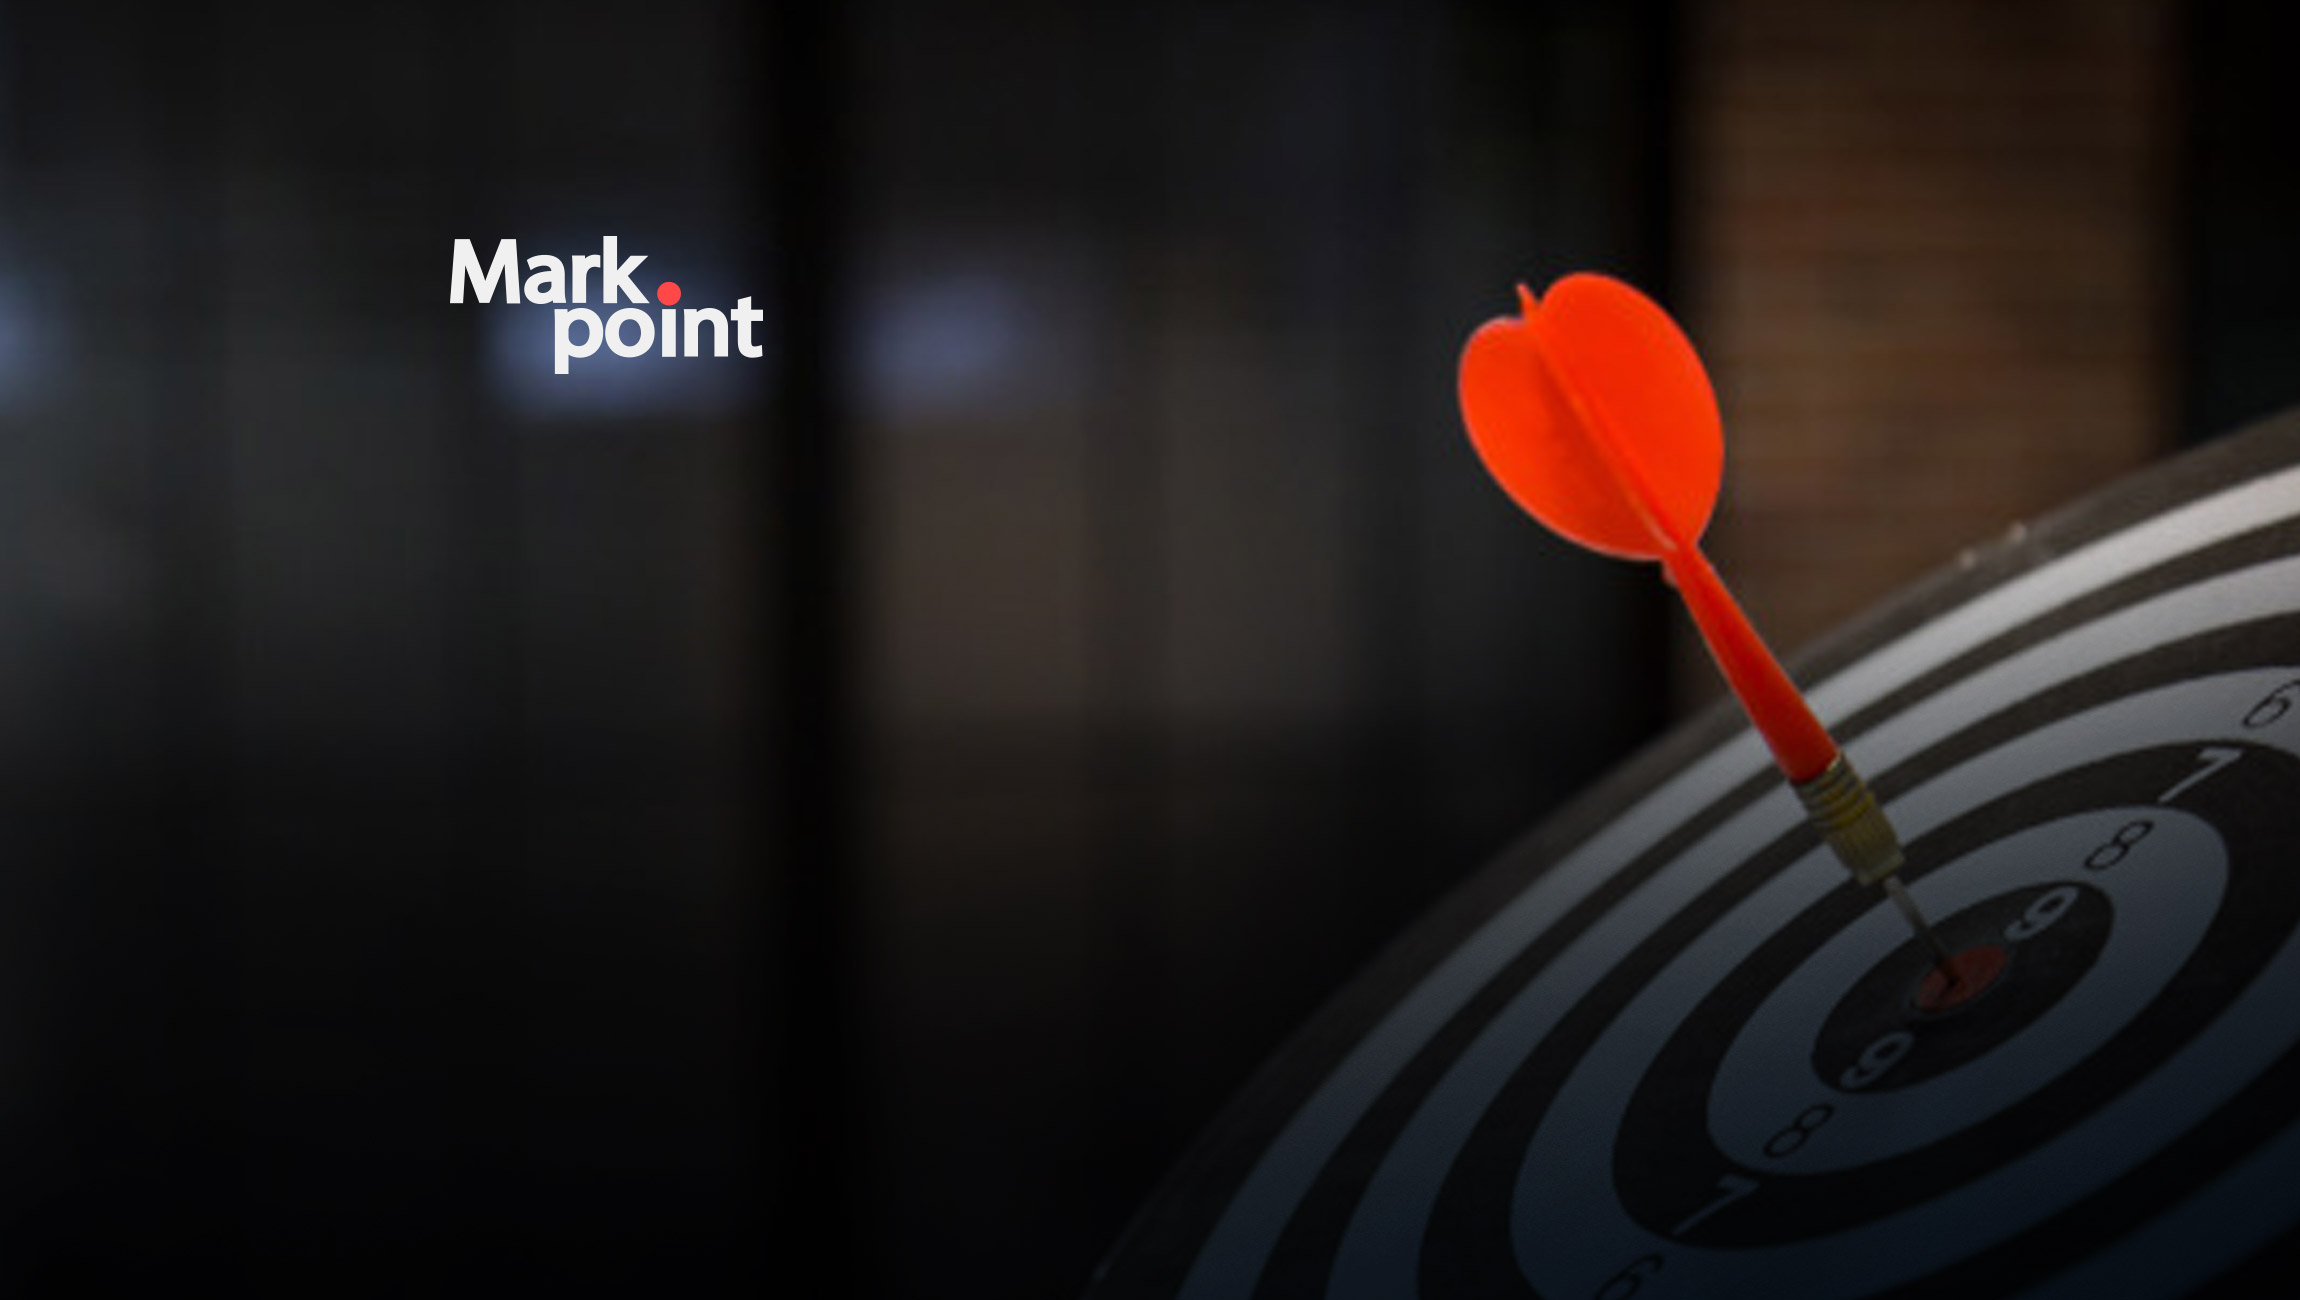 Introducing Markpoint DSP, a Point of Hassle-free Media Buying and Growth